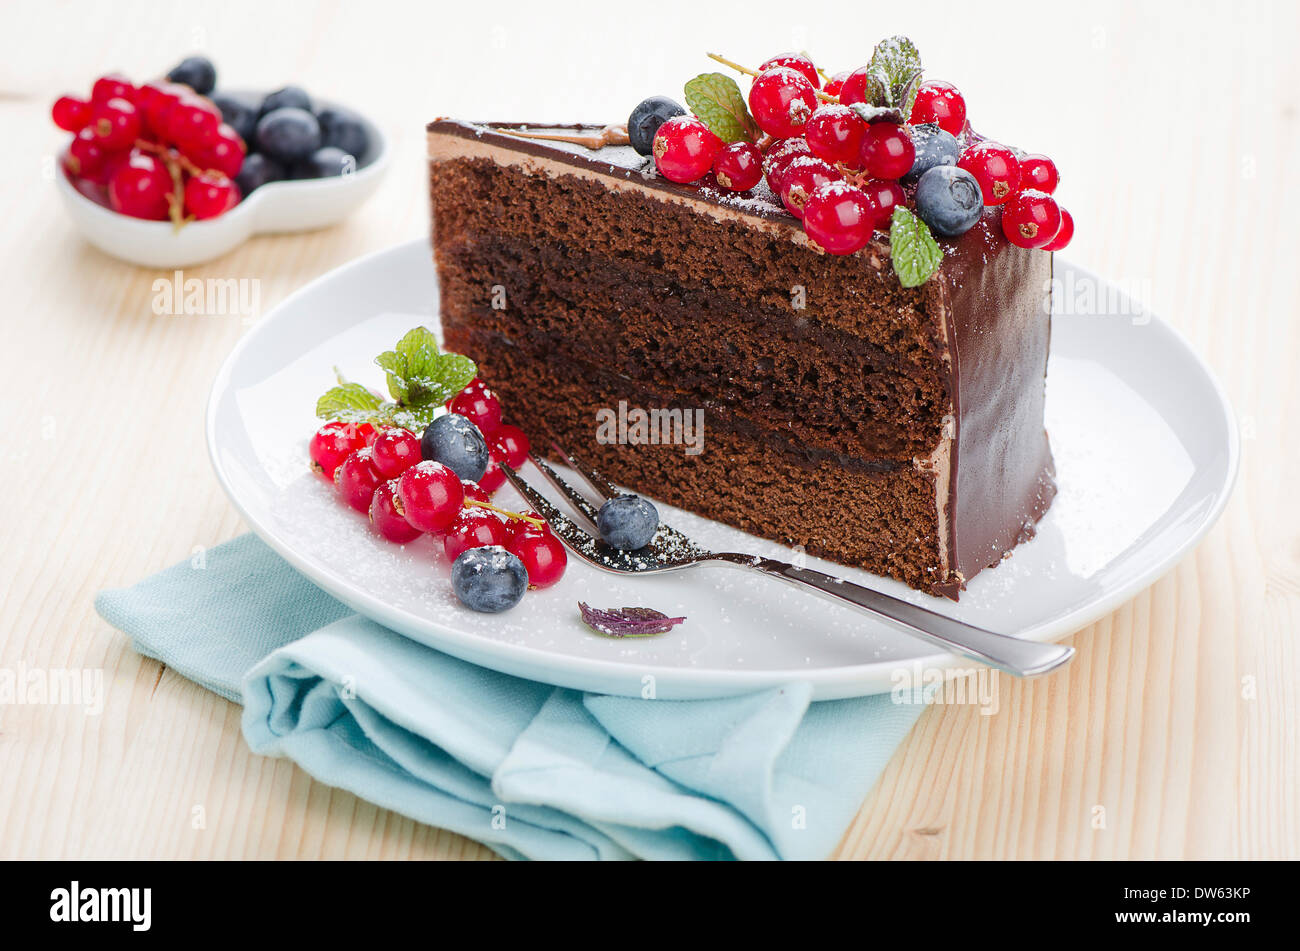 Sacher cake on a plate with berries Stock Photo